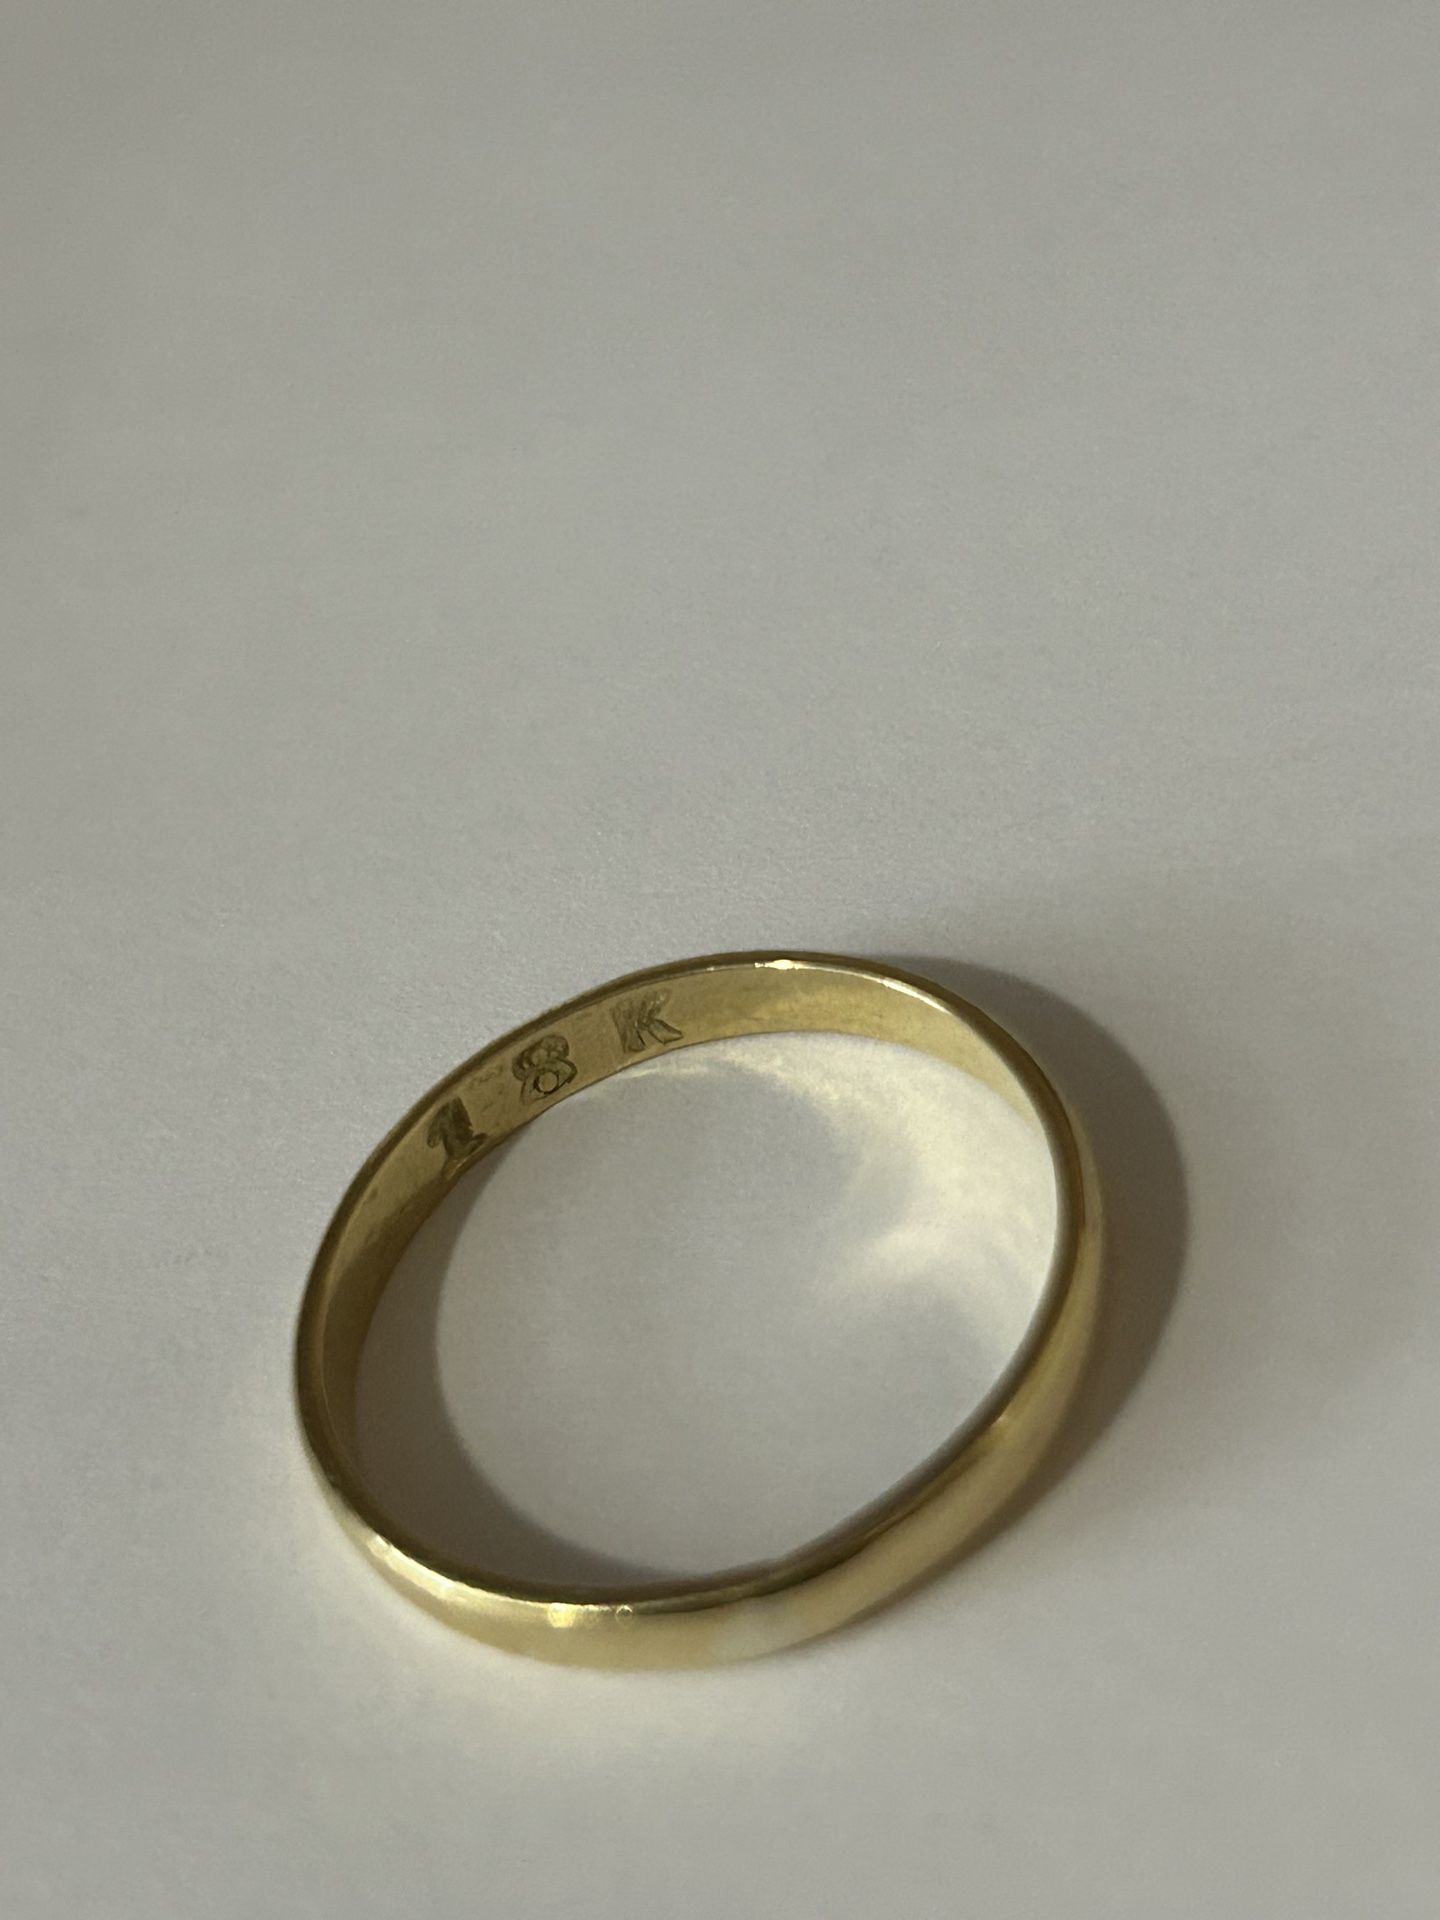 Solid *REAL* 18k Gold Ring Band